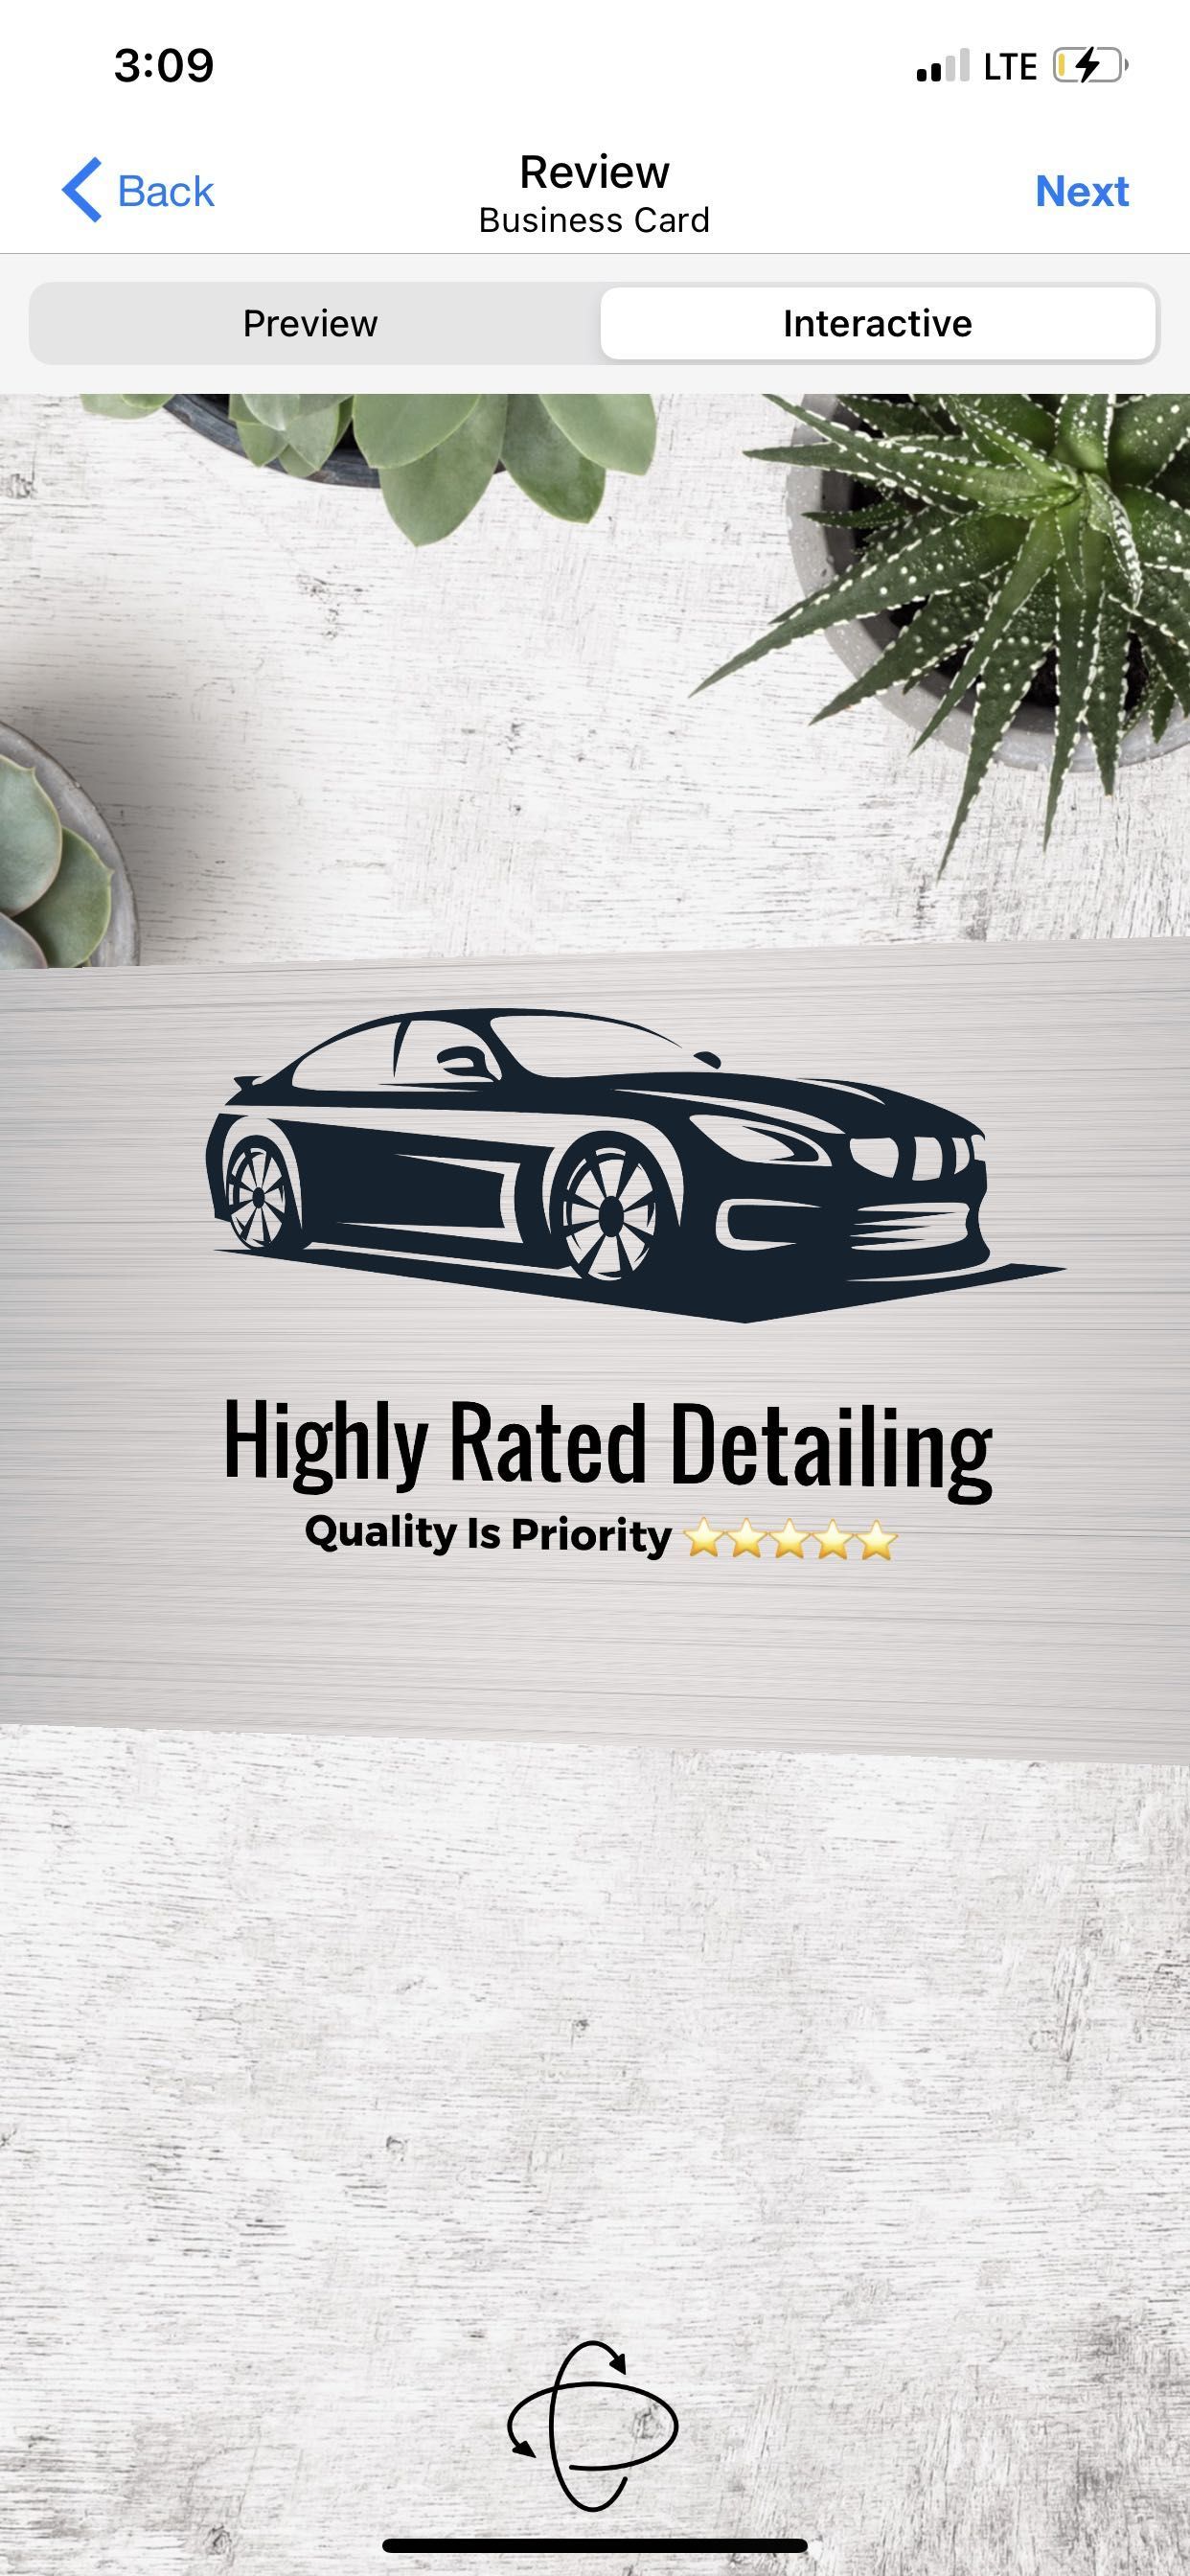 Highly Rated Detailing, 300 Galleria Pkwy SE, Atlanta, 30339